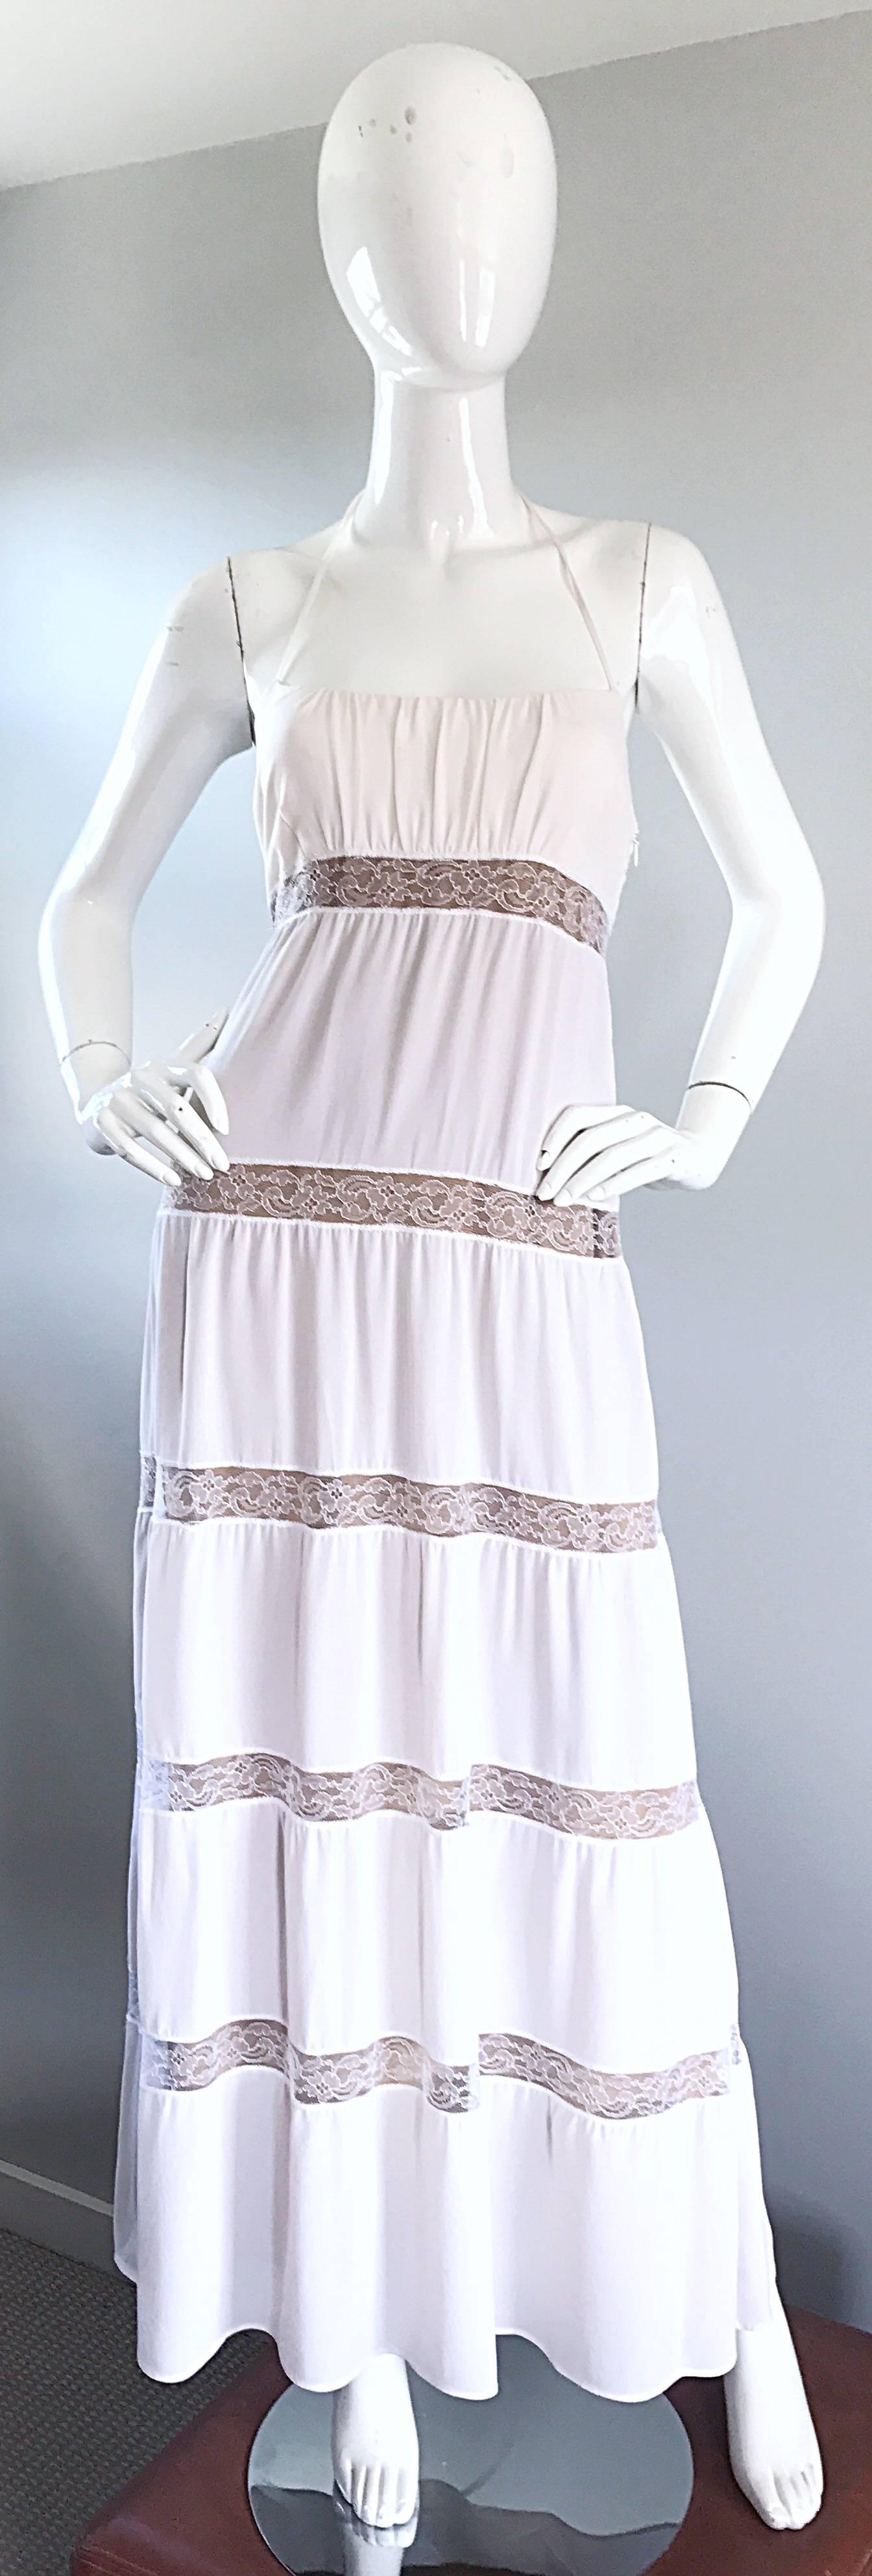 Michael Kors Collection White and Nude Silk + Lace Boho Halter Maxi Dress / Gown For Sale 1